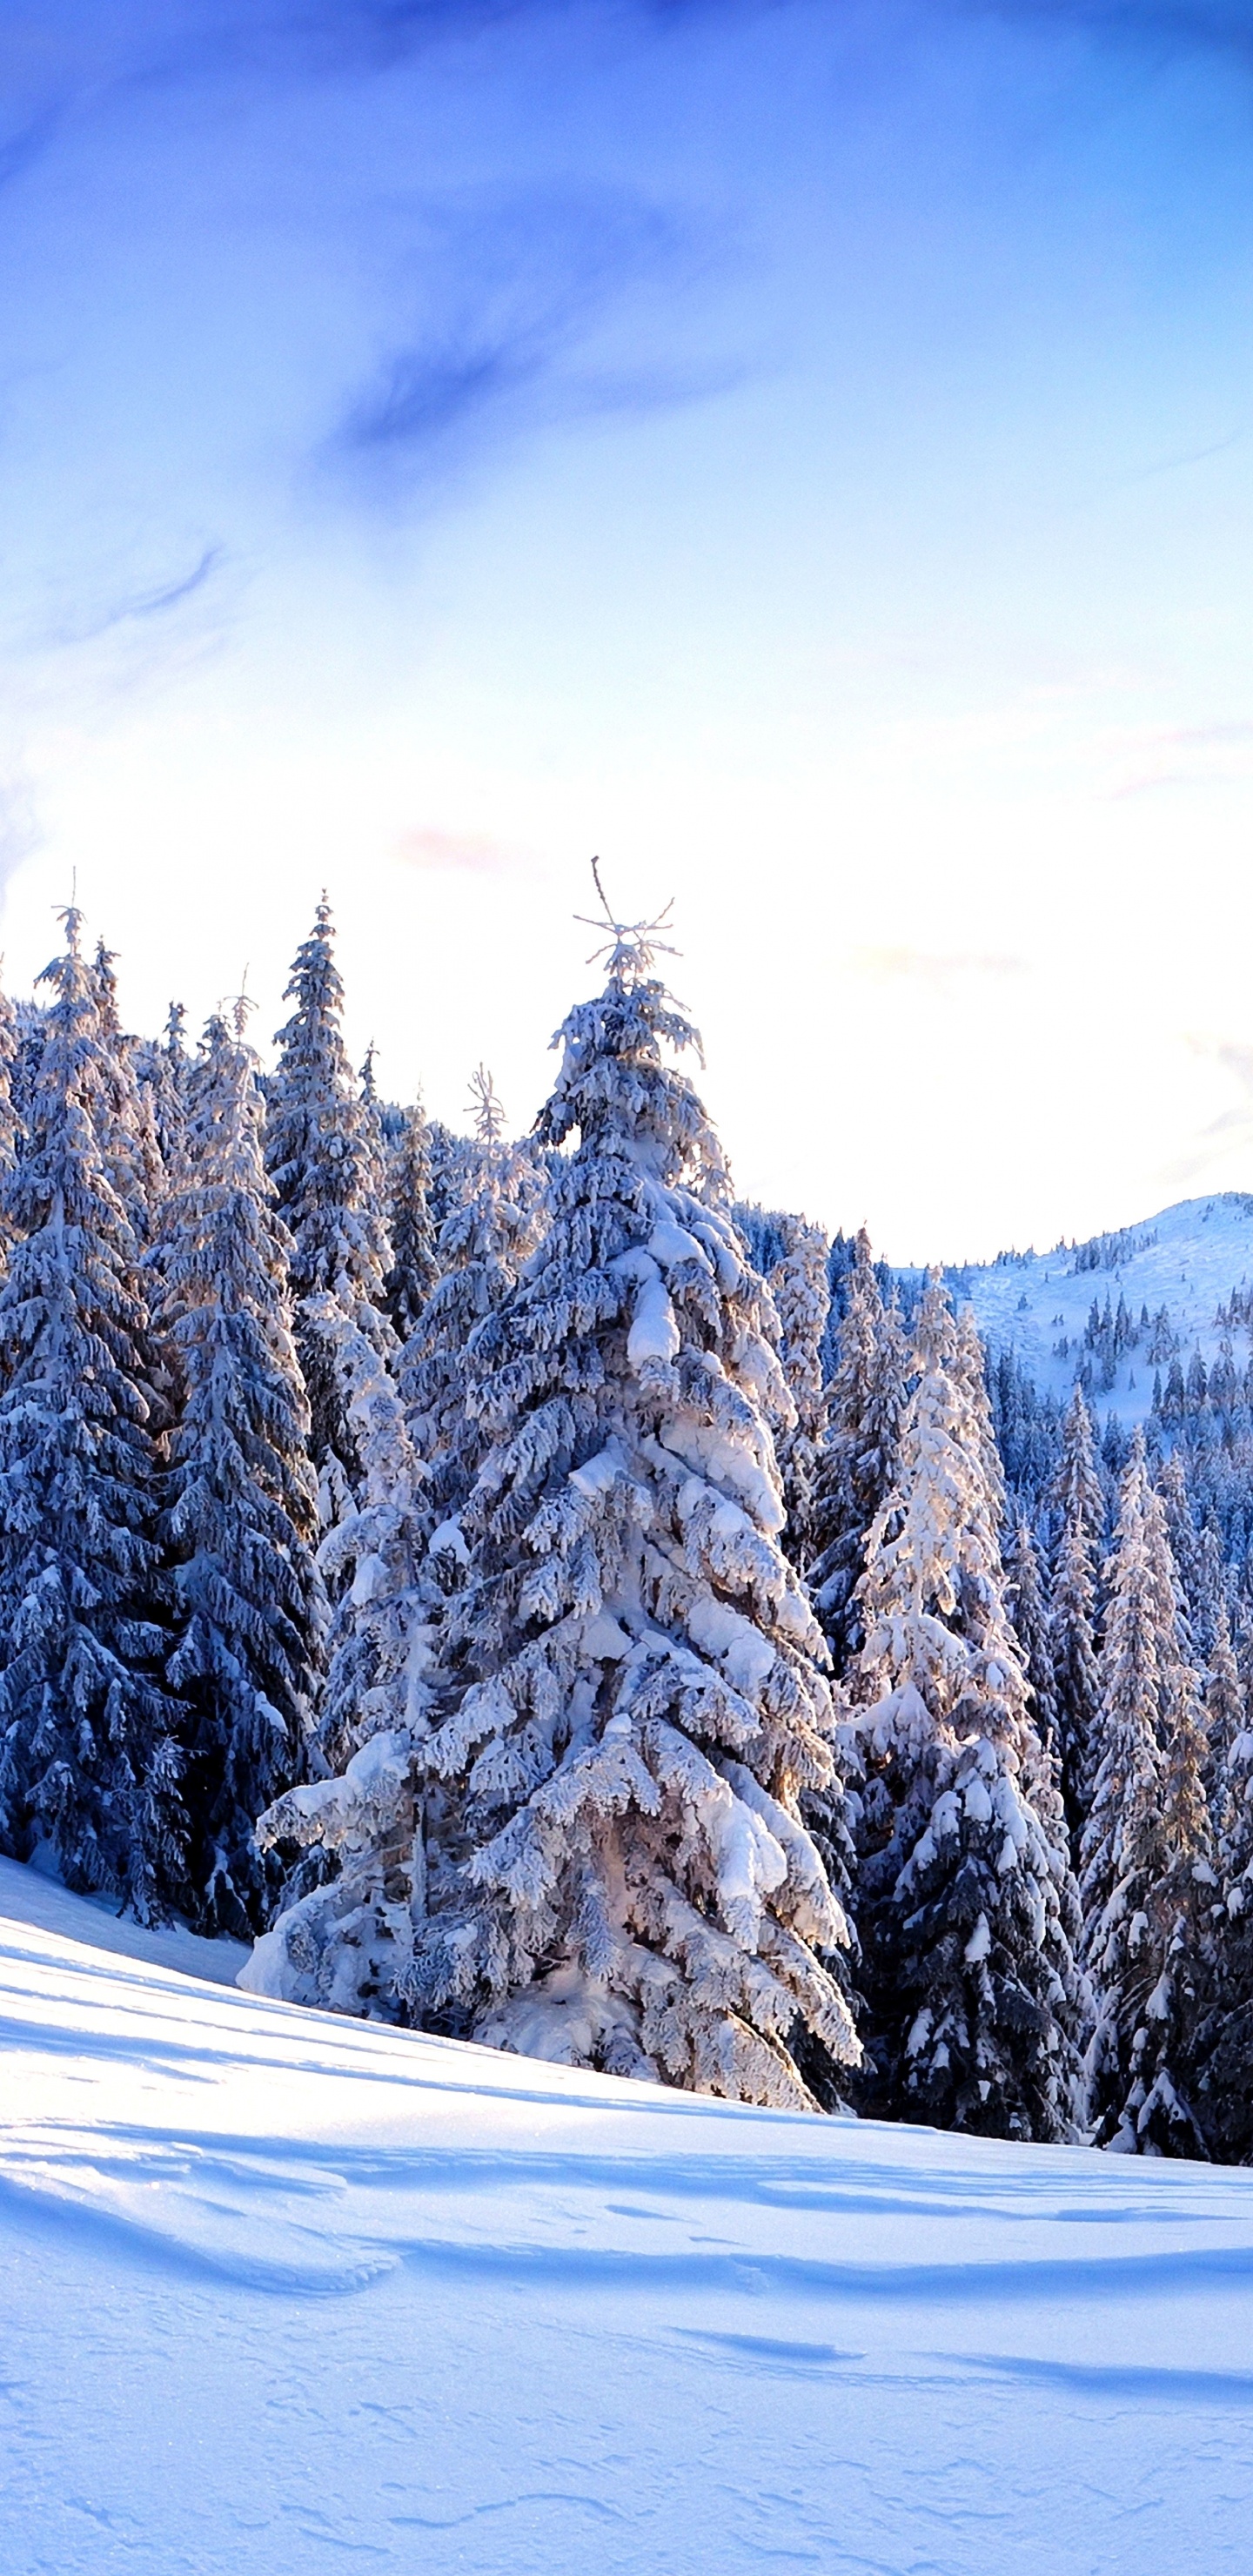 Snow Covered Pine Trees and Mountains During Daytime. Wallpaper in 1440x2960 Resolution